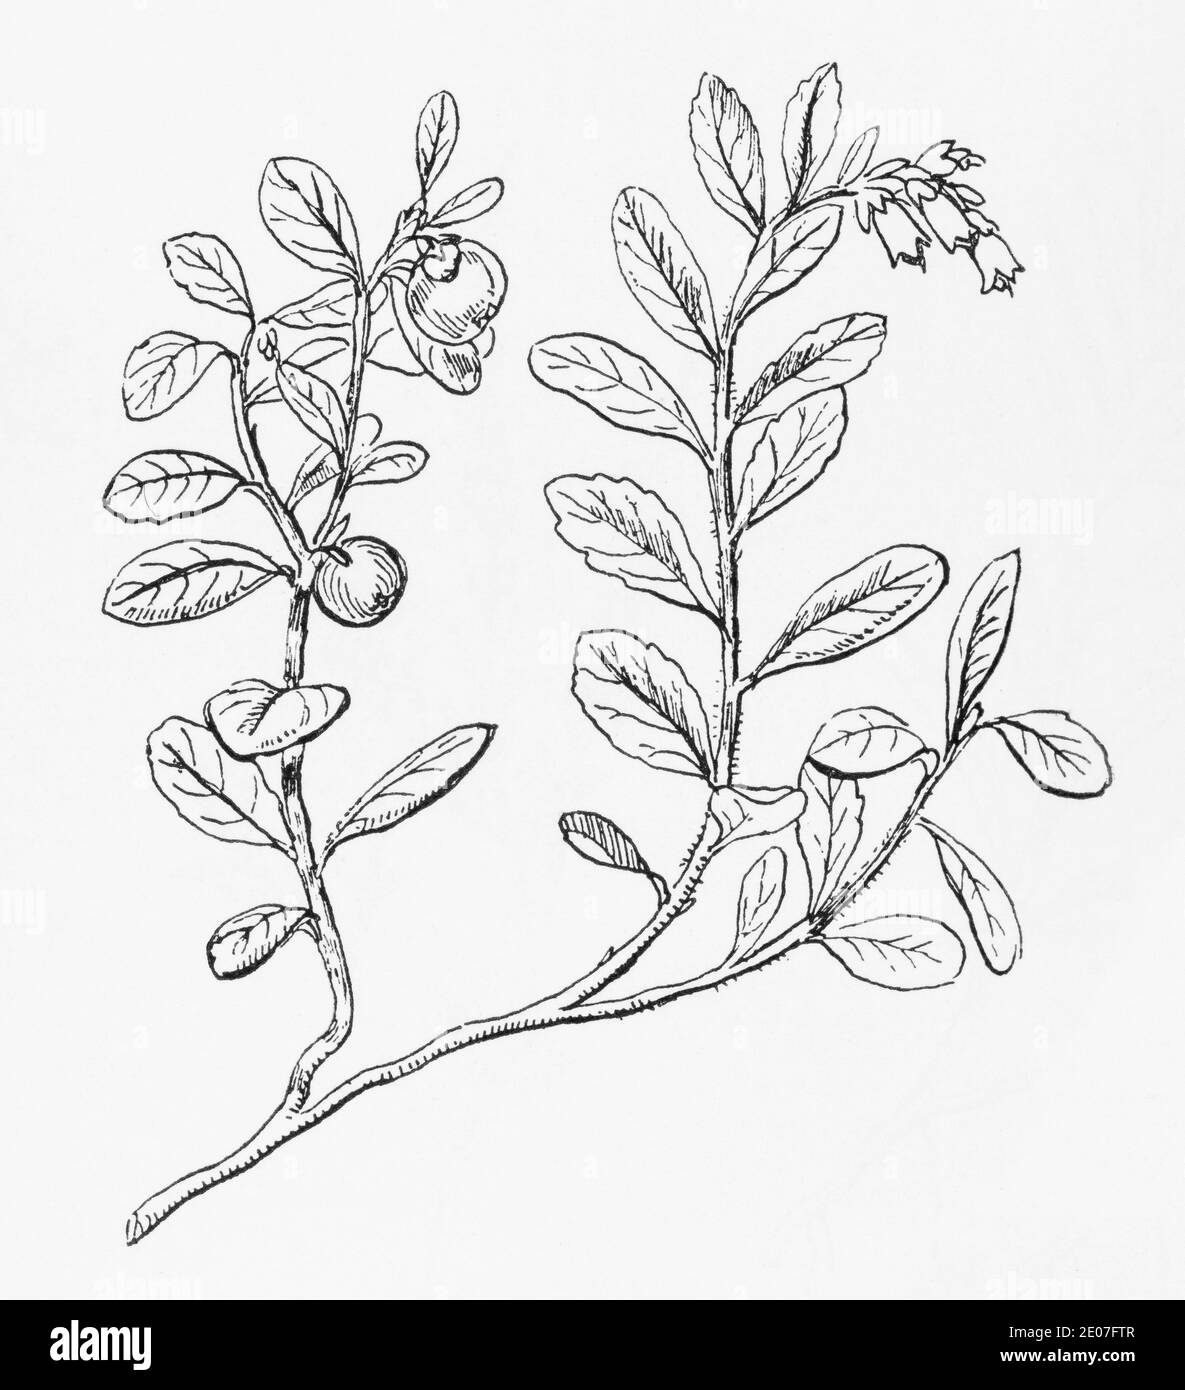 Old botanical illustration engraving of Cow Berry, Red Whortleberry, Lingonberry / Vaccinium vitis-idaea. Traditional medicinal plant. See Notes Stock Photo